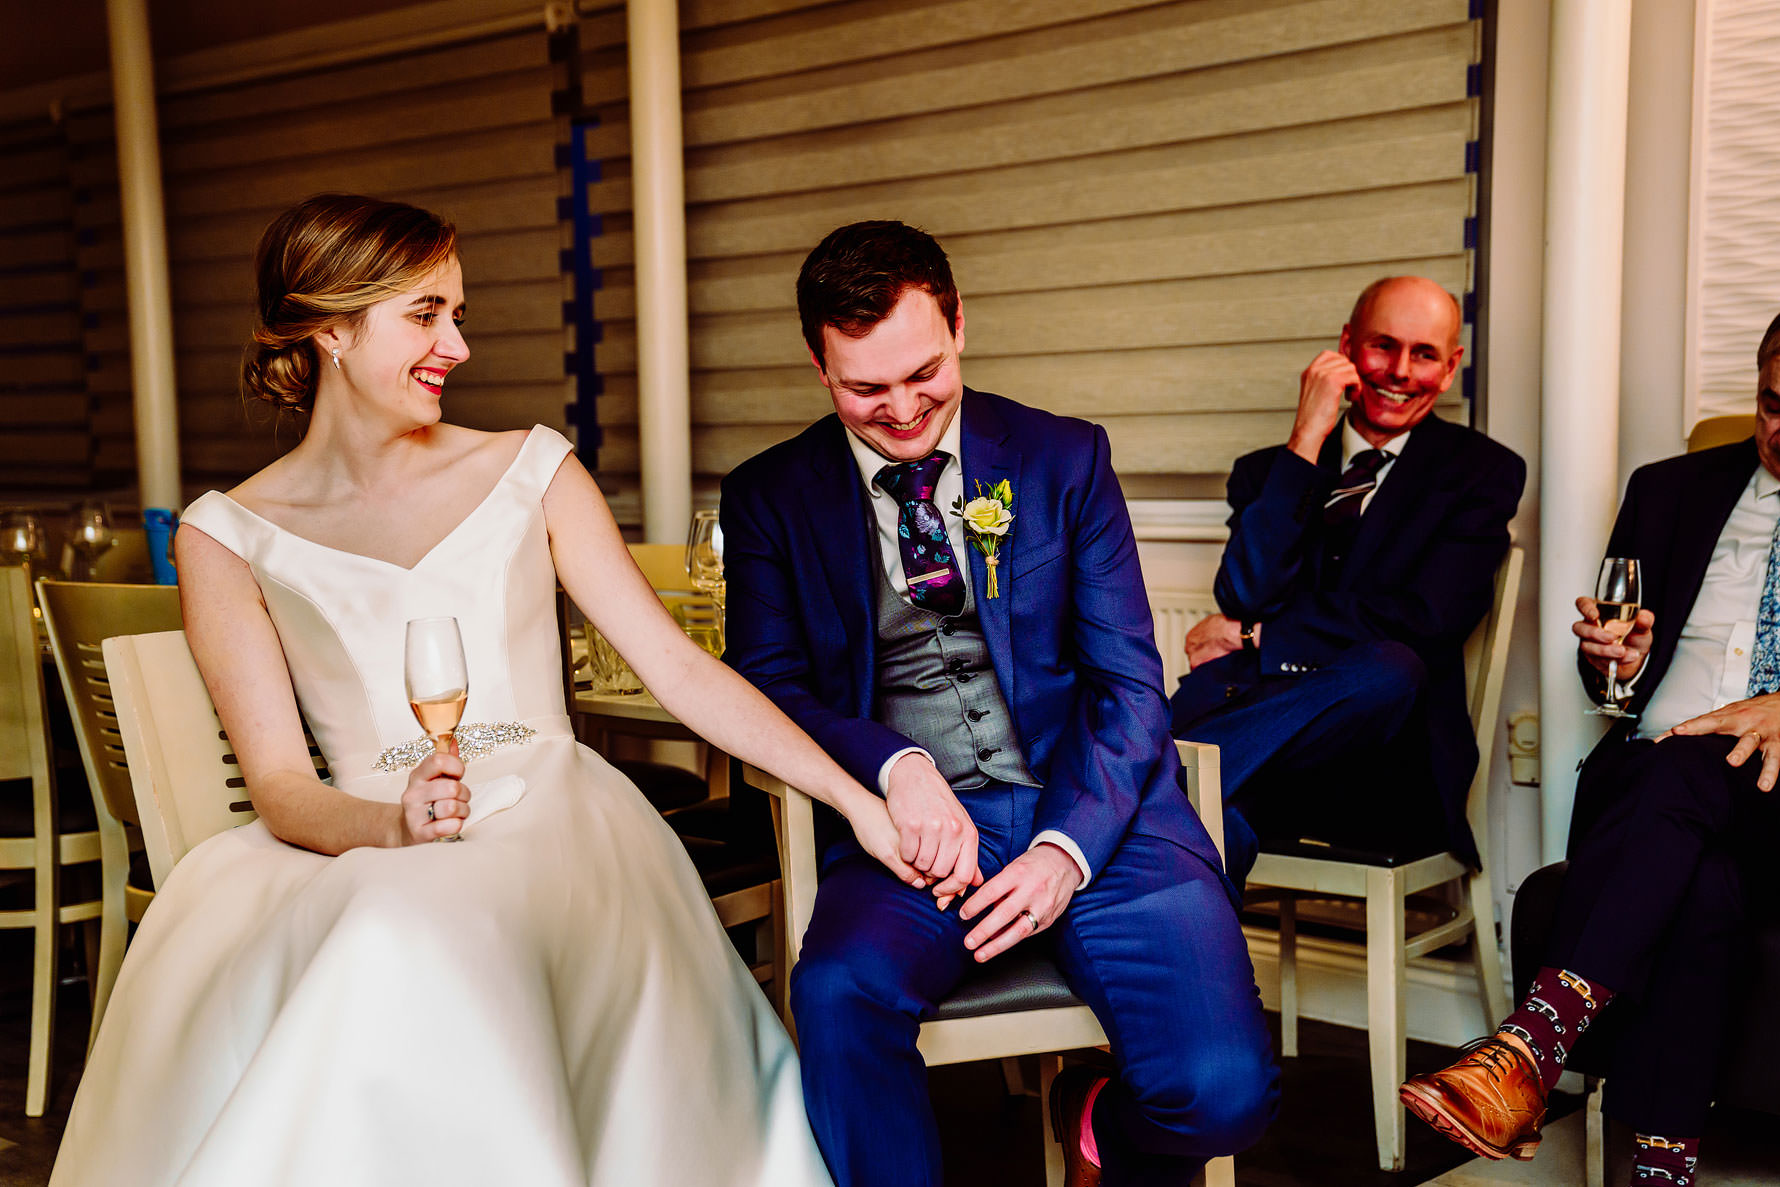 Bournemouth beach wedding photography by Elliot W Patching